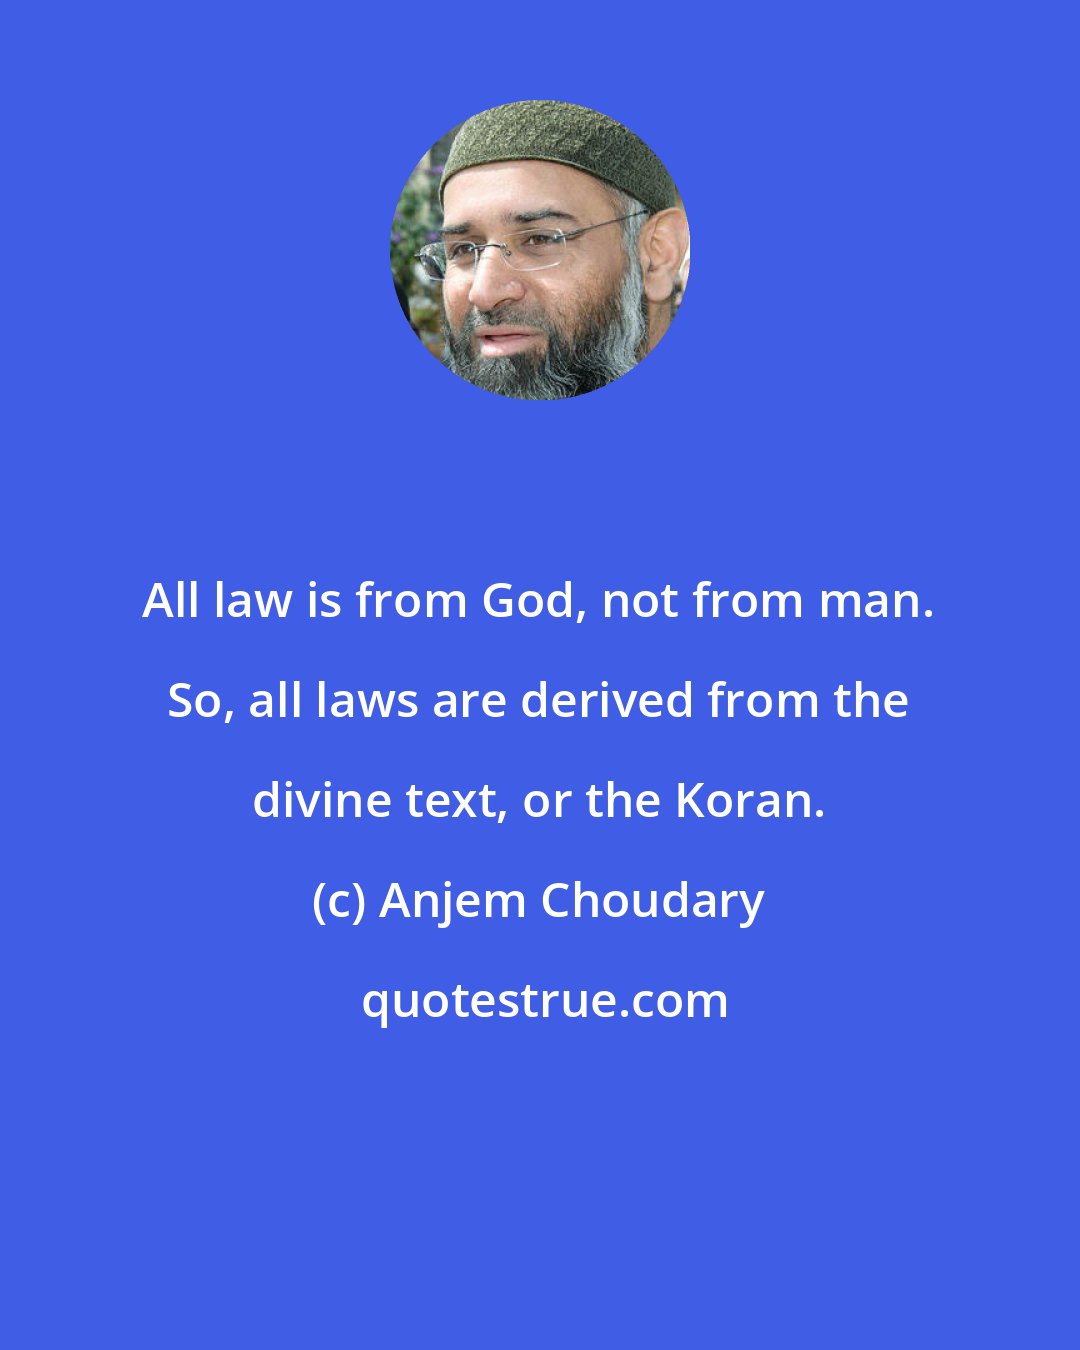 Anjem Choudary: All law is from God, not from man. So, all laws are derived from the divine text, or the Koran.